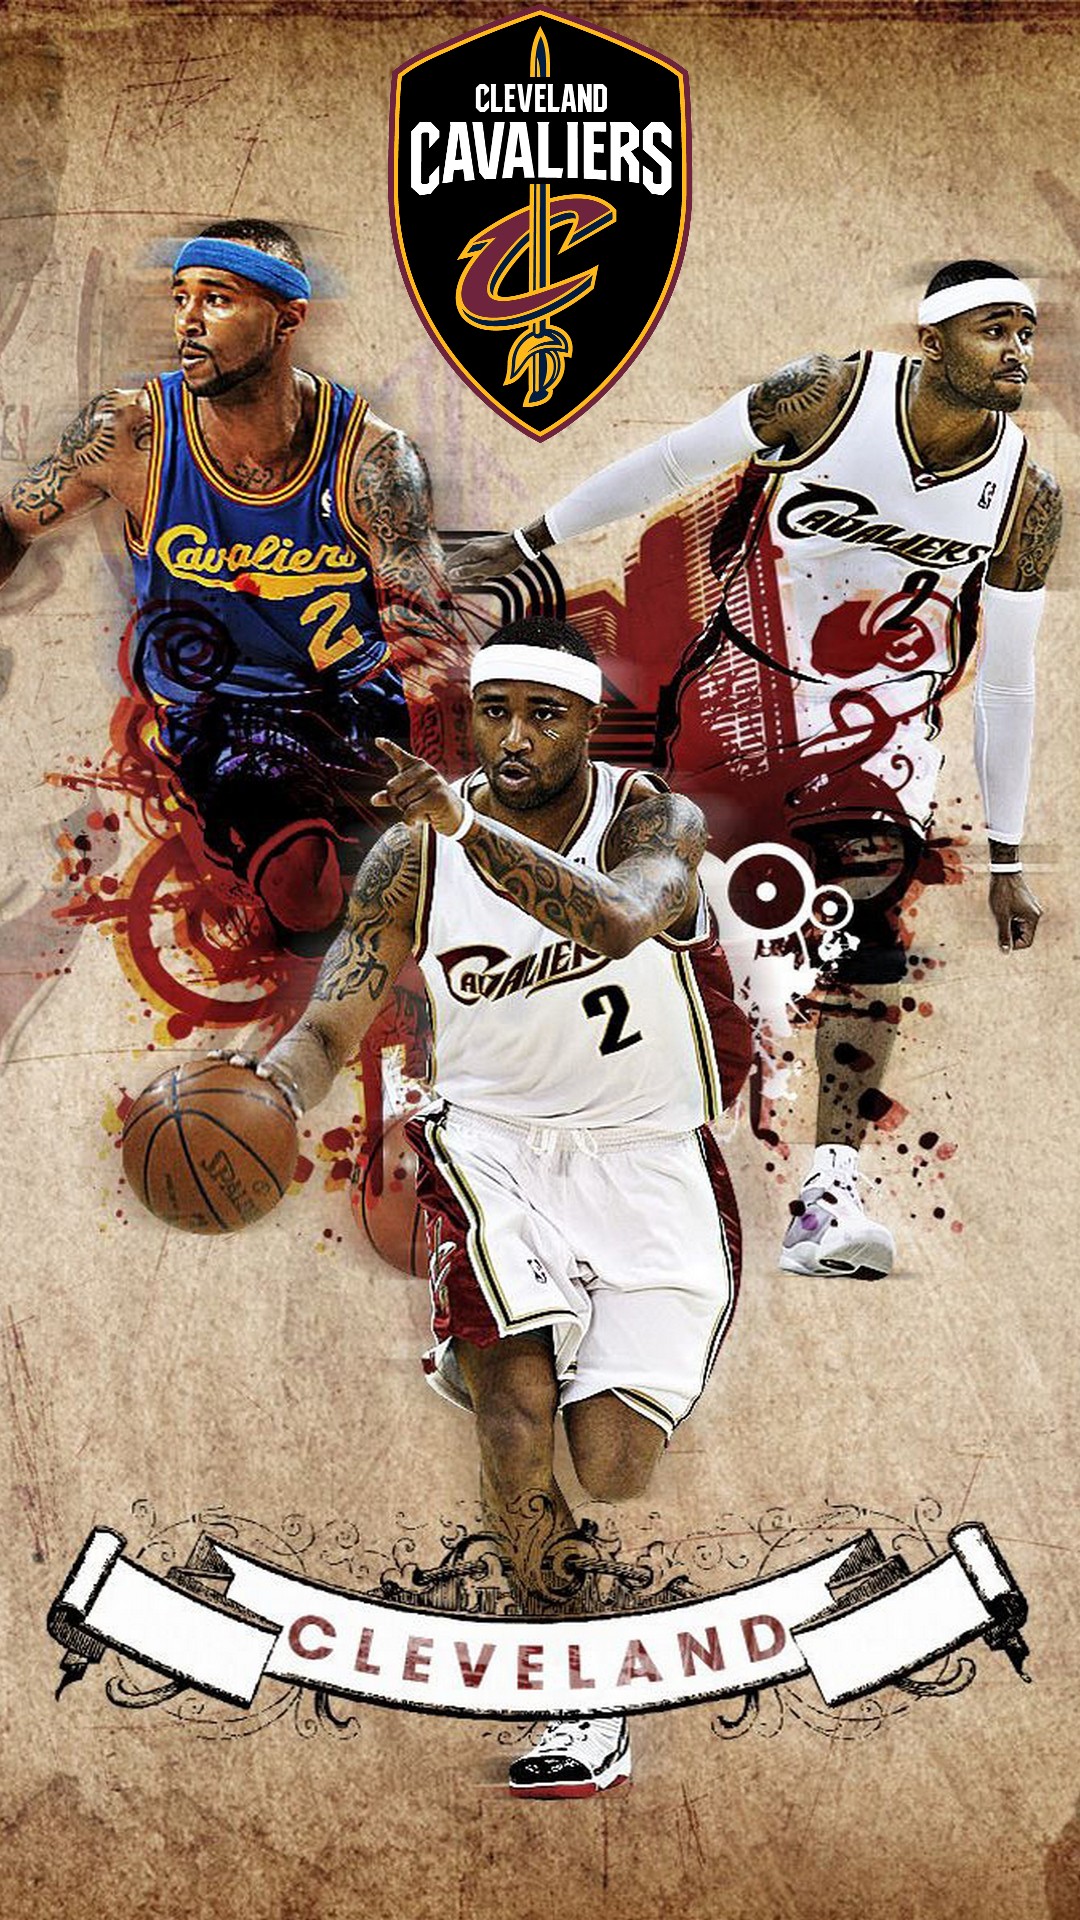 Cleveland Cavaliers Nba Wallpaper For Mobile - Basket Nba Wallpaper 2018 - HD Wallpaper 